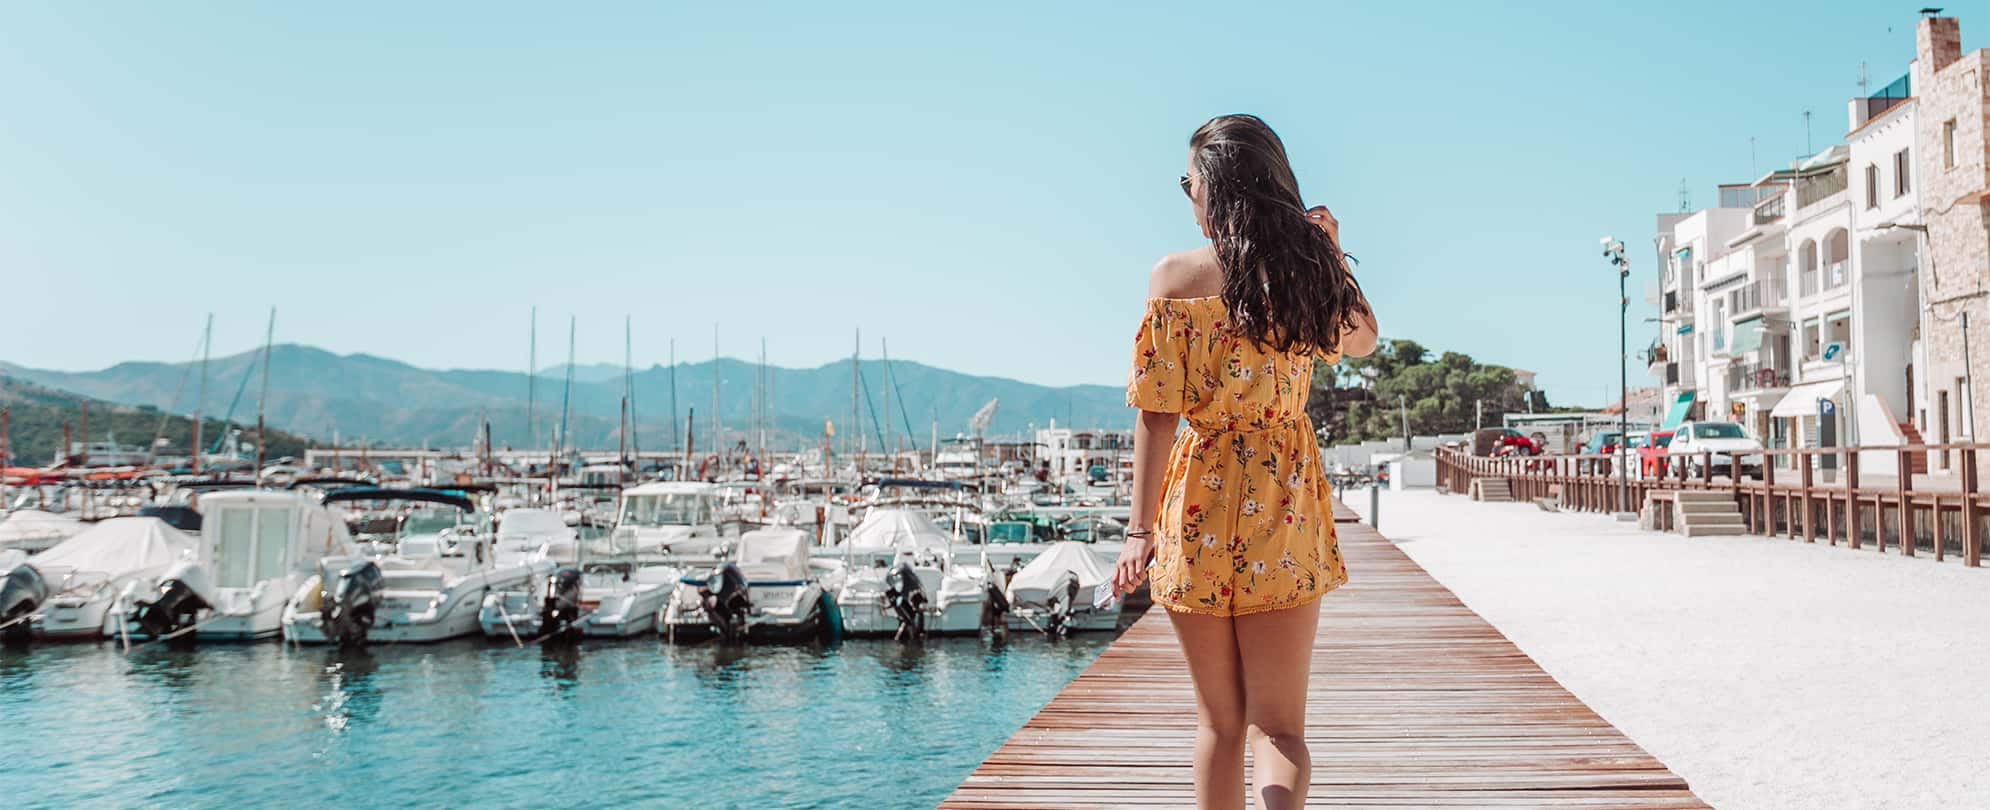 A woman in a yellow romper walks along a marina dock on a summer day